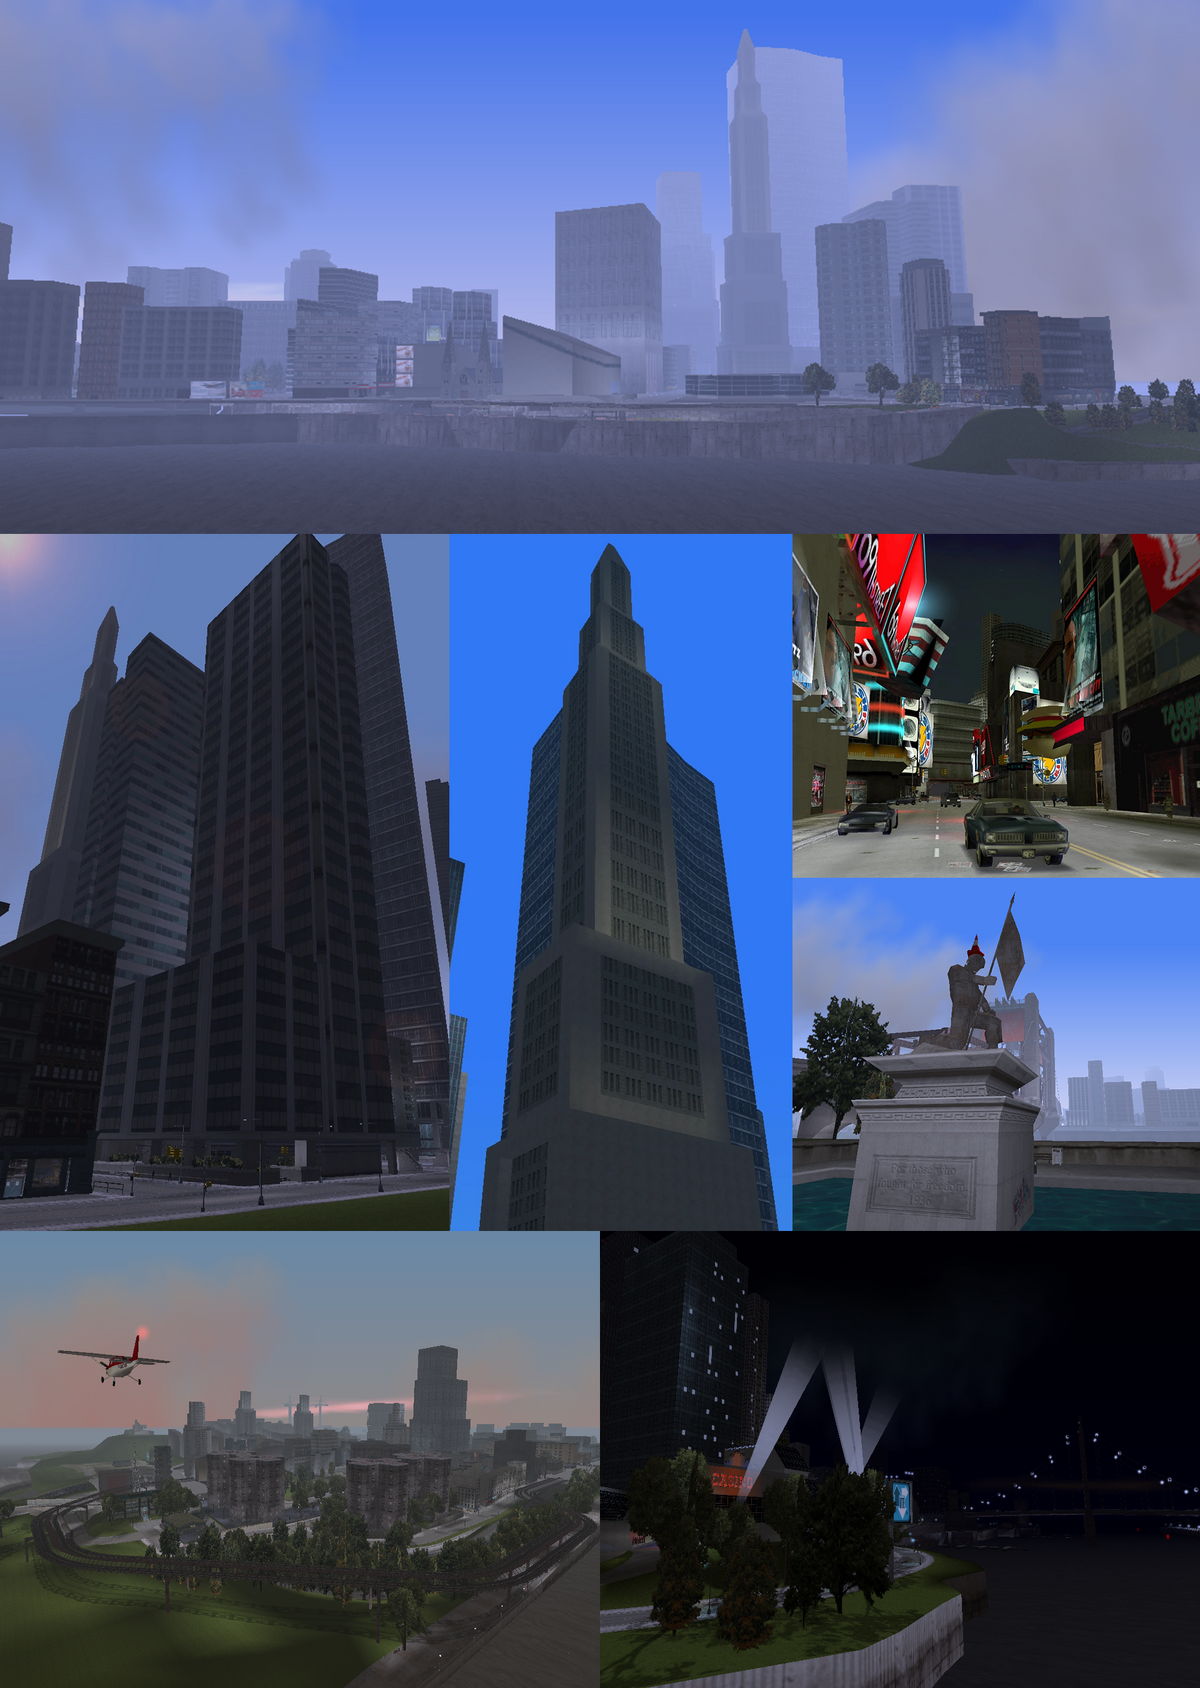 Weapons in Grand Theft Auto: Liberty City Stories, GTA Wiki